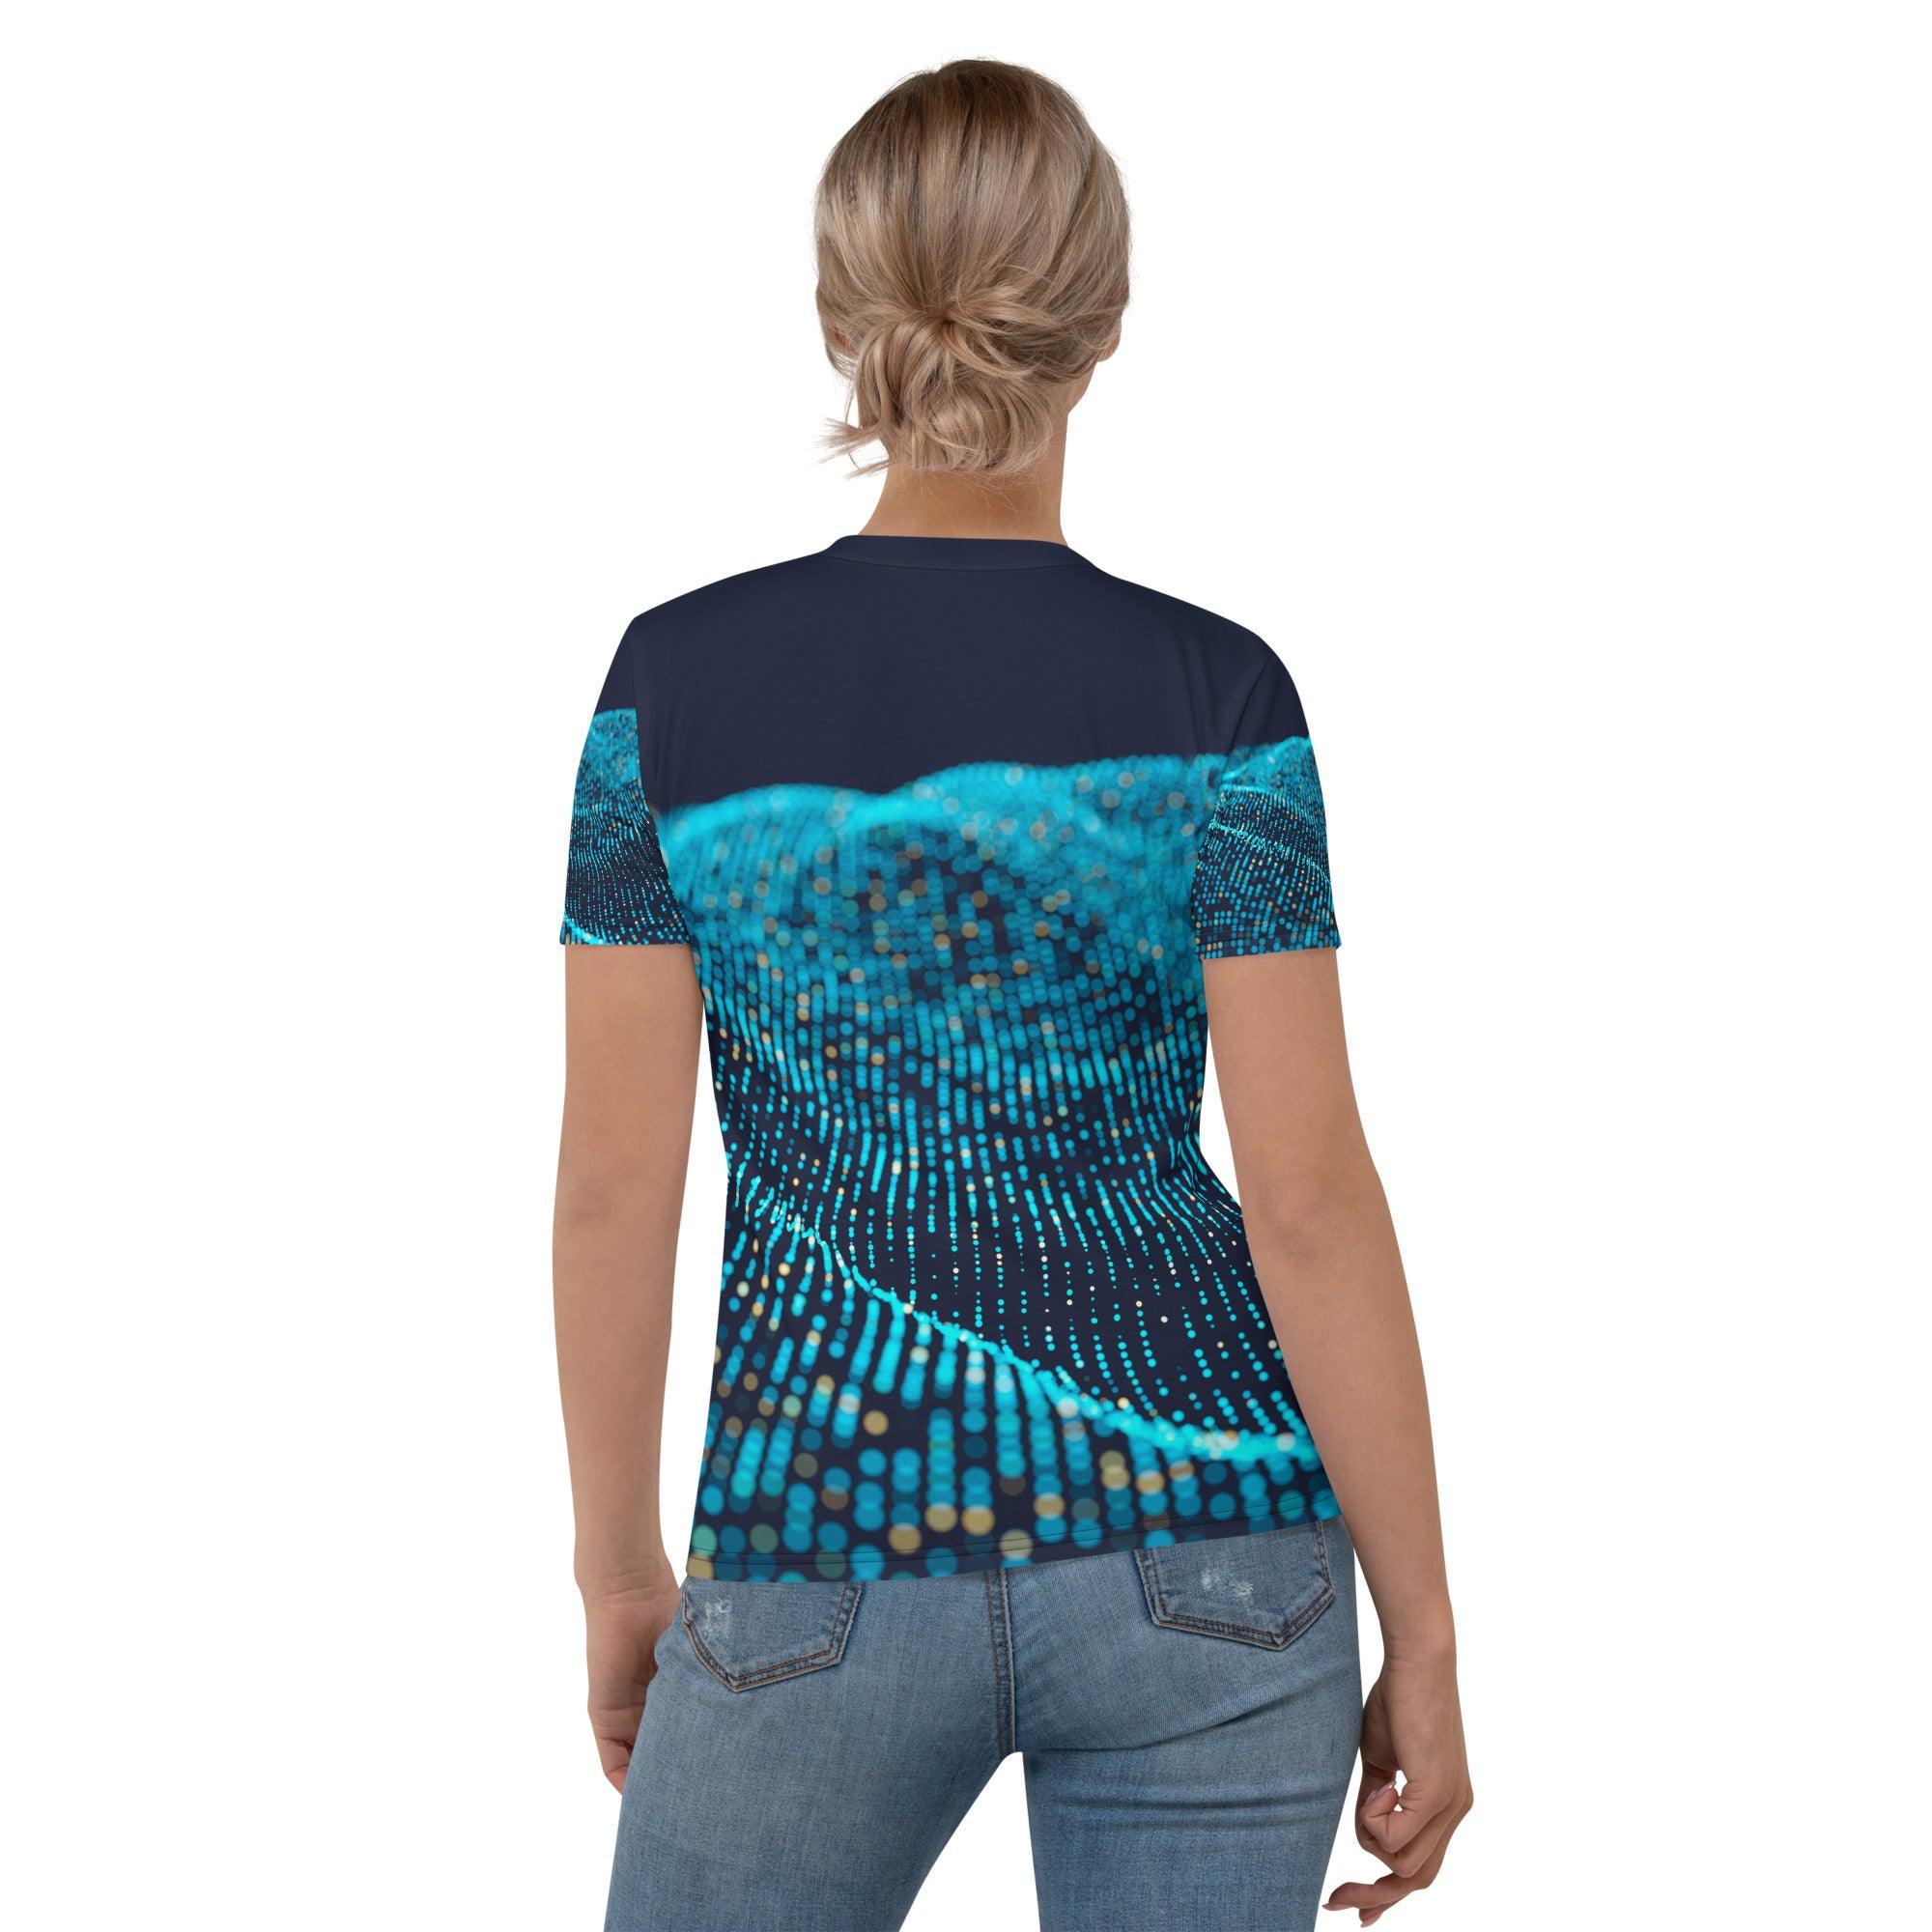 Great Things Never Come From Comfort Zone | All Over Women's T-shirt - Affirm Effect